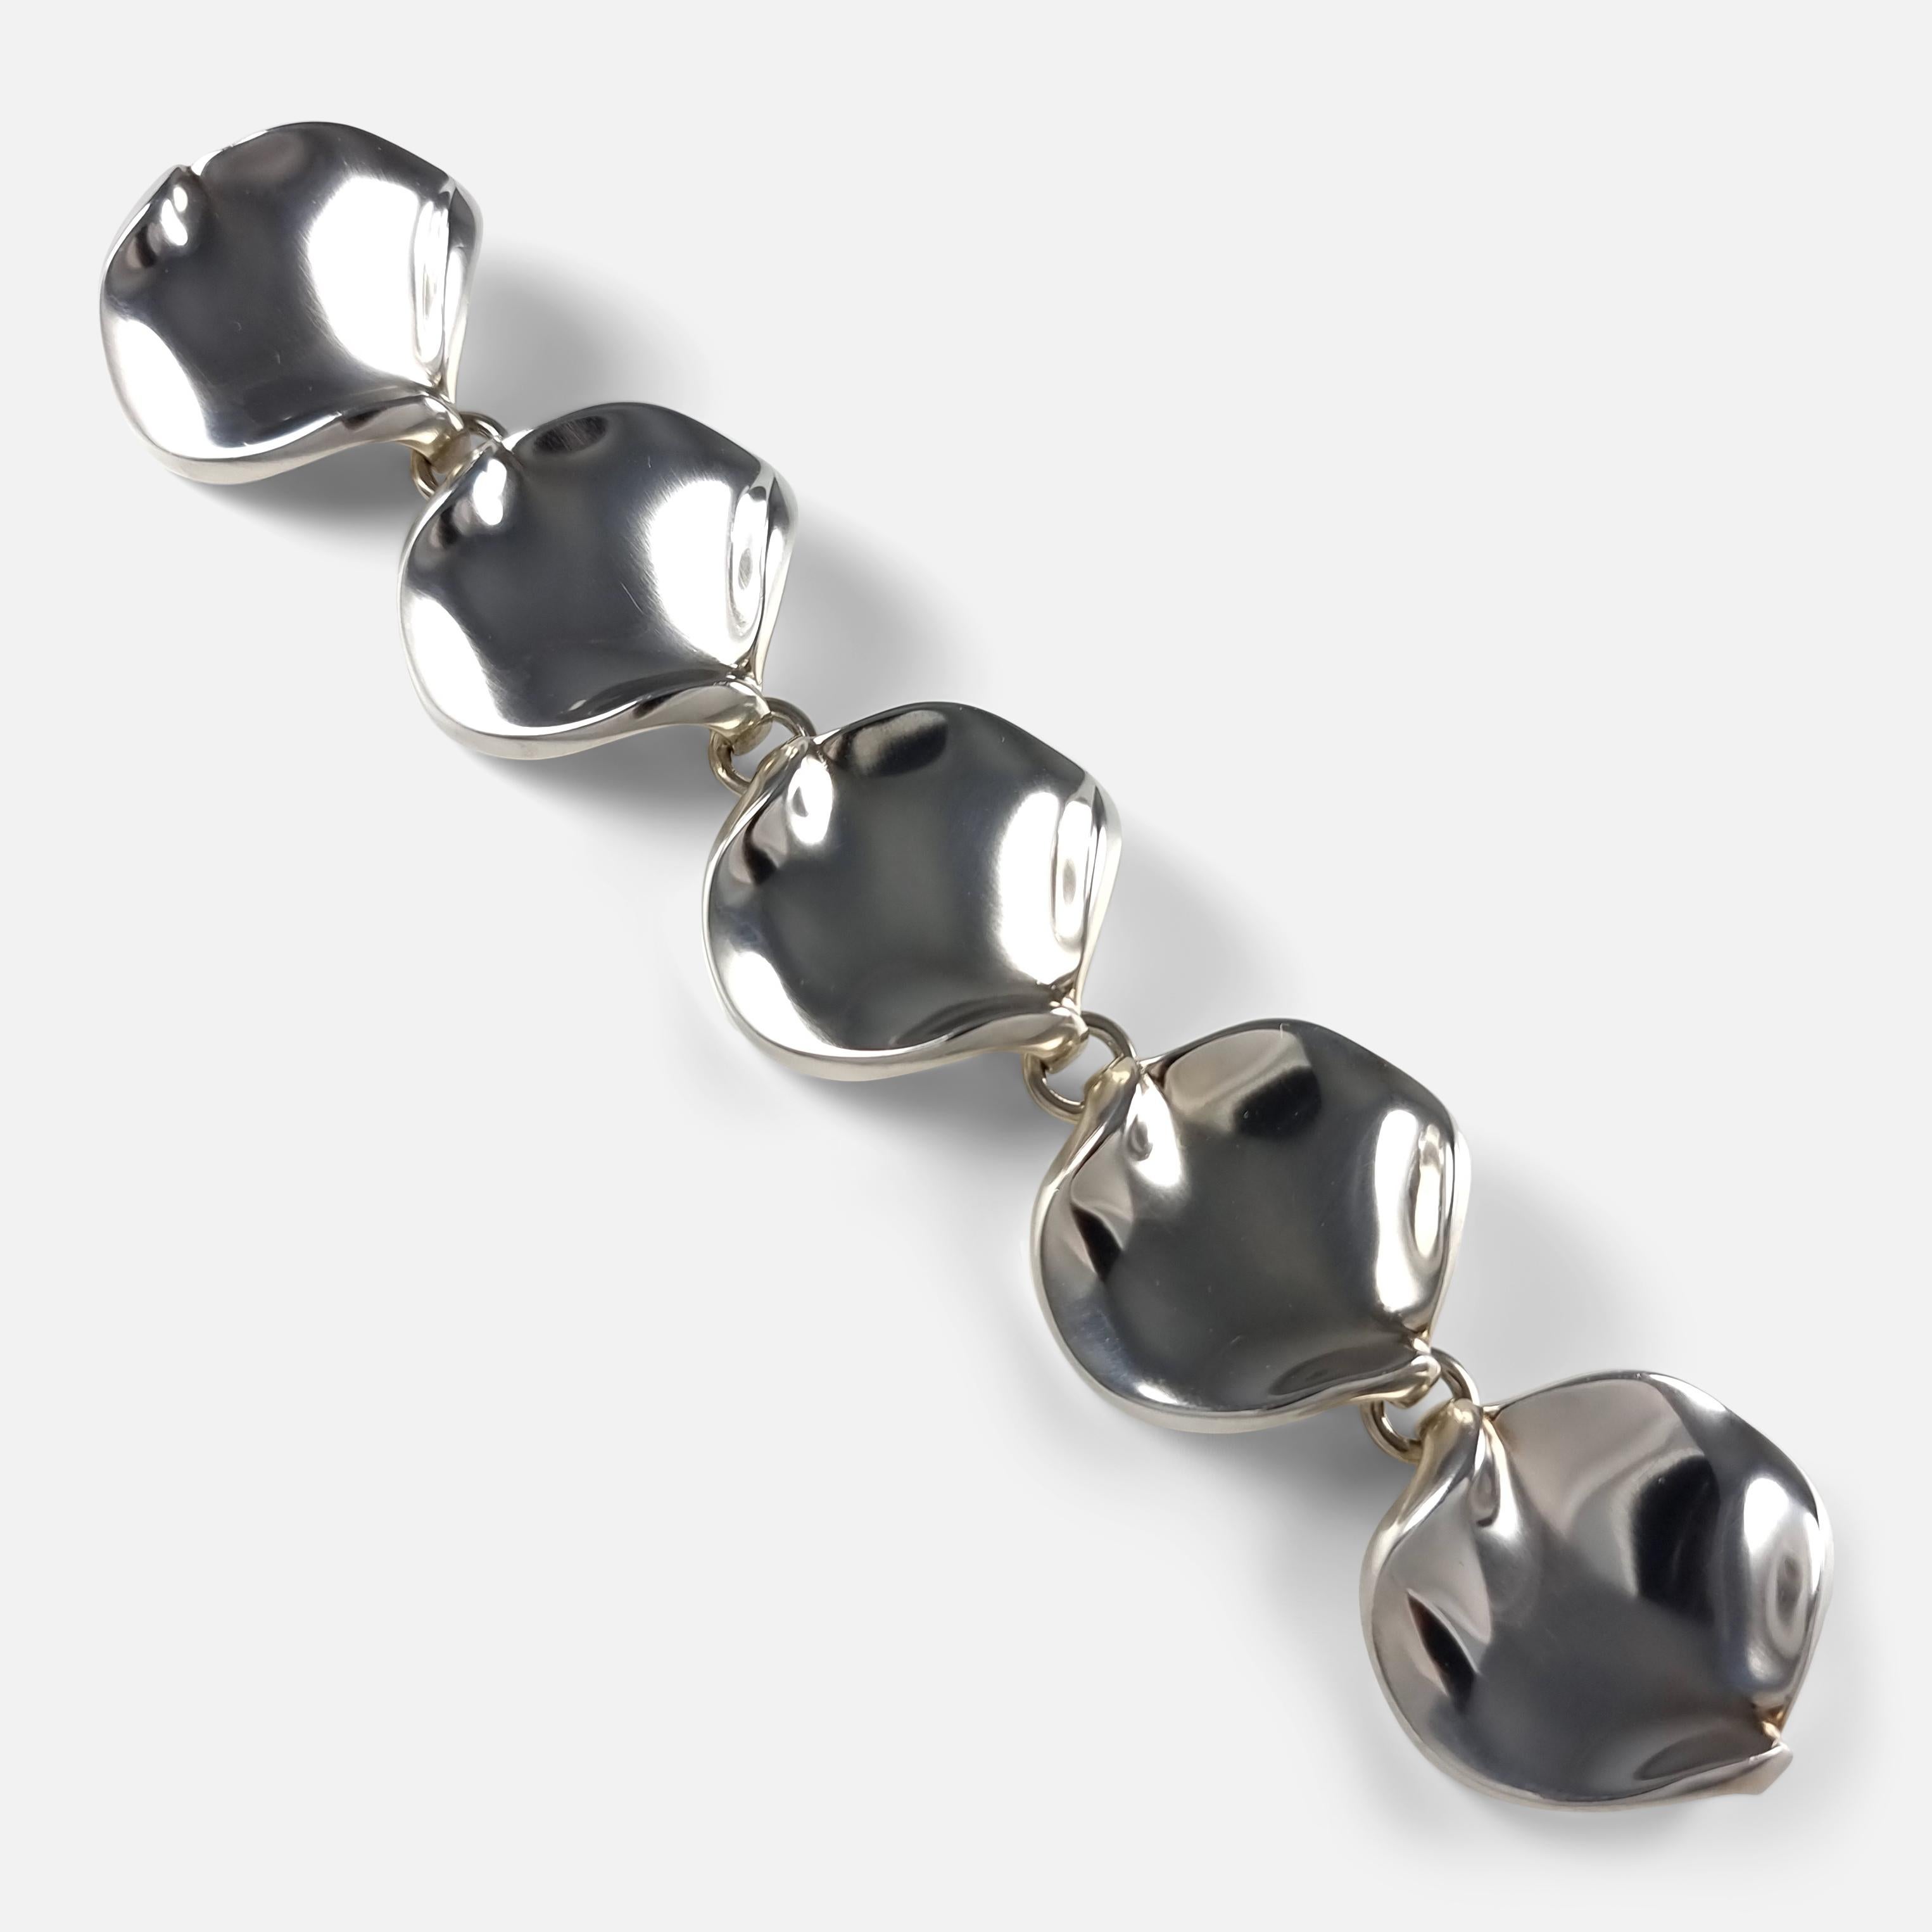 A sterling silver bracelet, designed by Hans Hansen for Georg Jensen. 

The bracelet is stamped with the Georg Jensen within a dotted oval marking (used since 1945), Hans Hansen marks, 